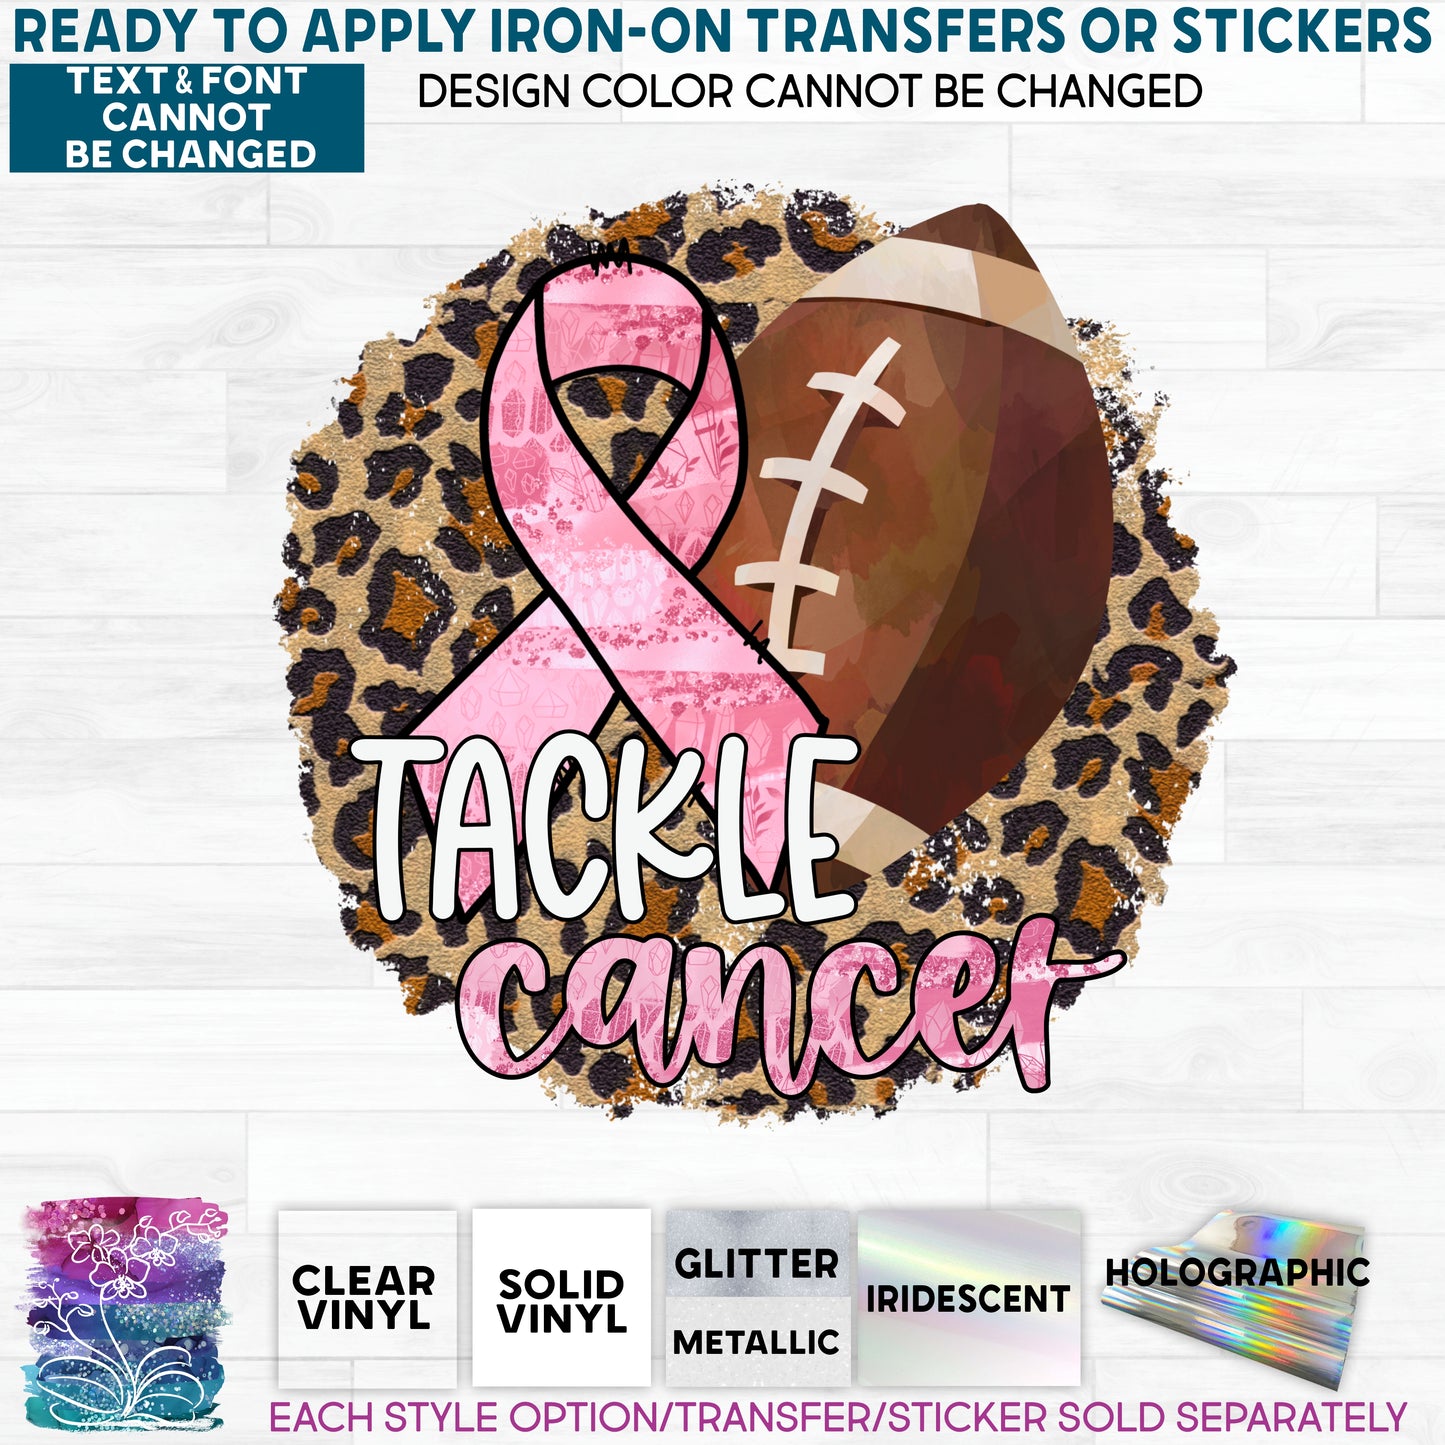 (s082-3B) Tackle Cancer Support Awareness Glitter or Vinyl Iron-On Transfer or Sticker